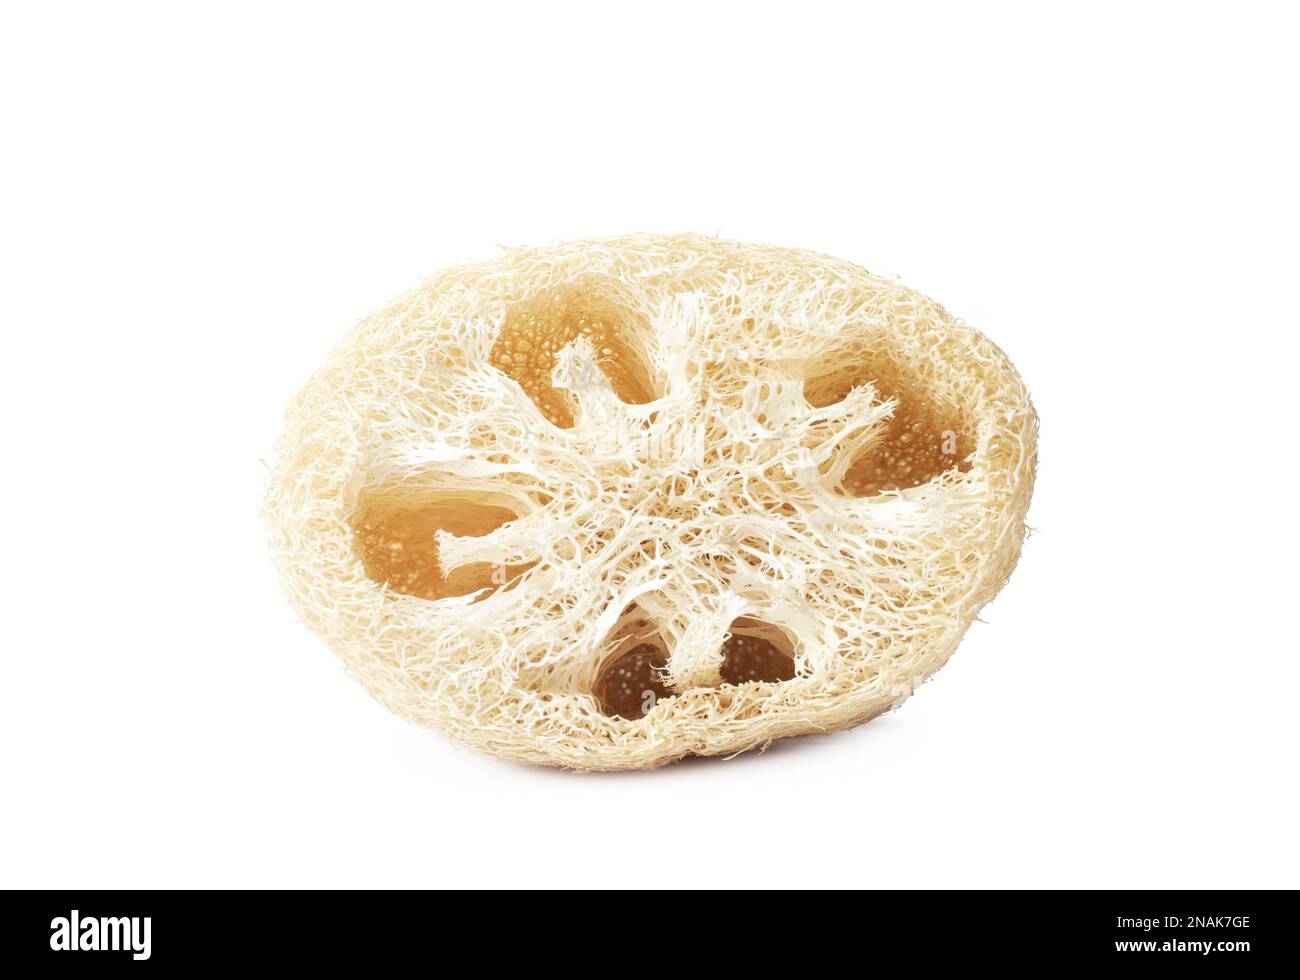 Loofah sponge Cut Out Stock Images & Pictures - Page 2 - Alamy